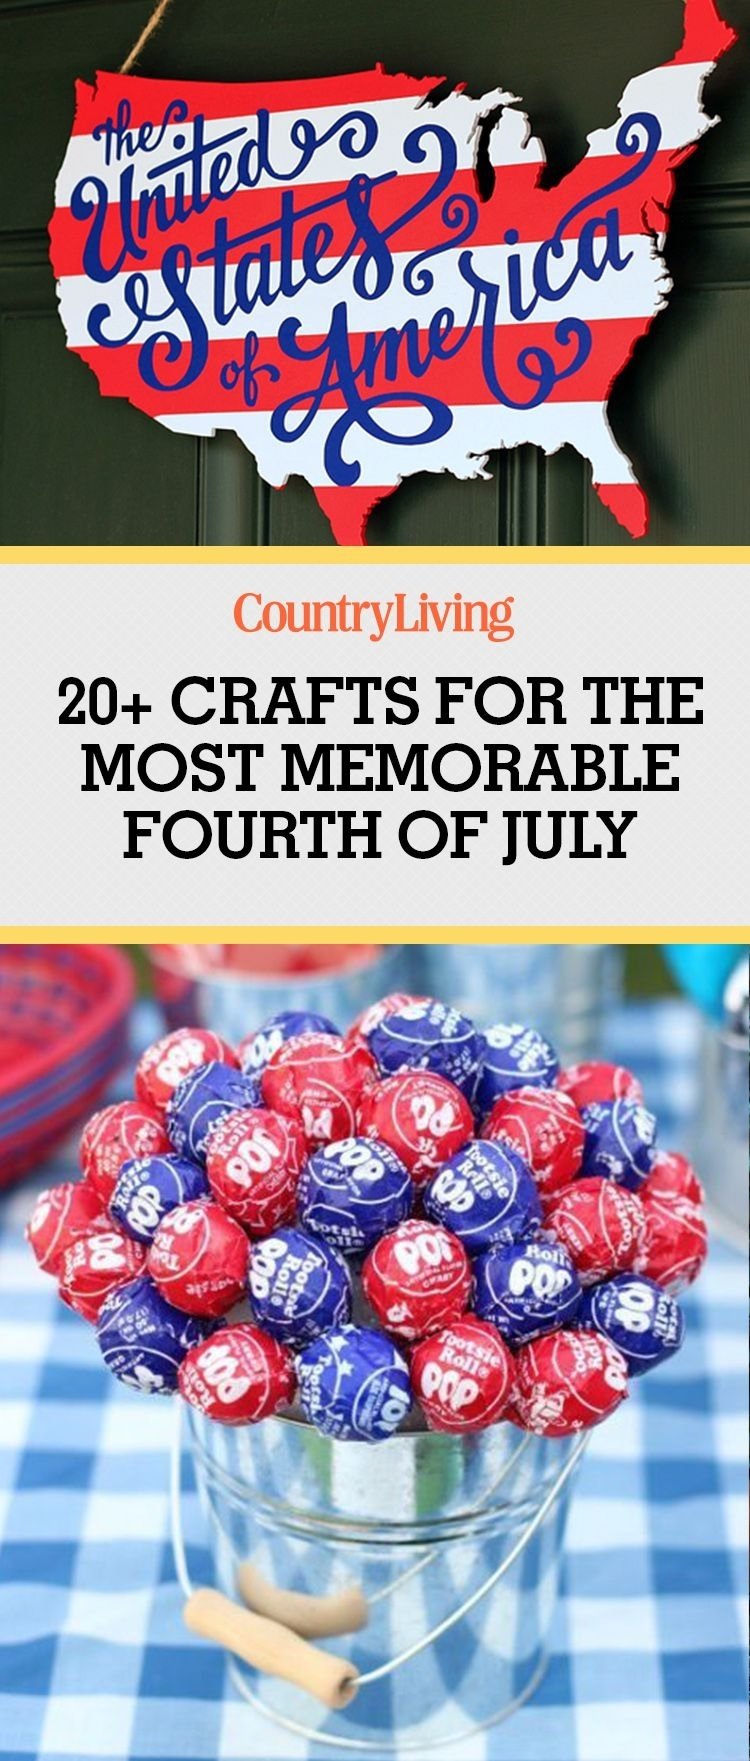 10 Best Fourth Of July Craft Ideas 26 easy 4th of july crafts patriotic craft ideas diy decorations 2022